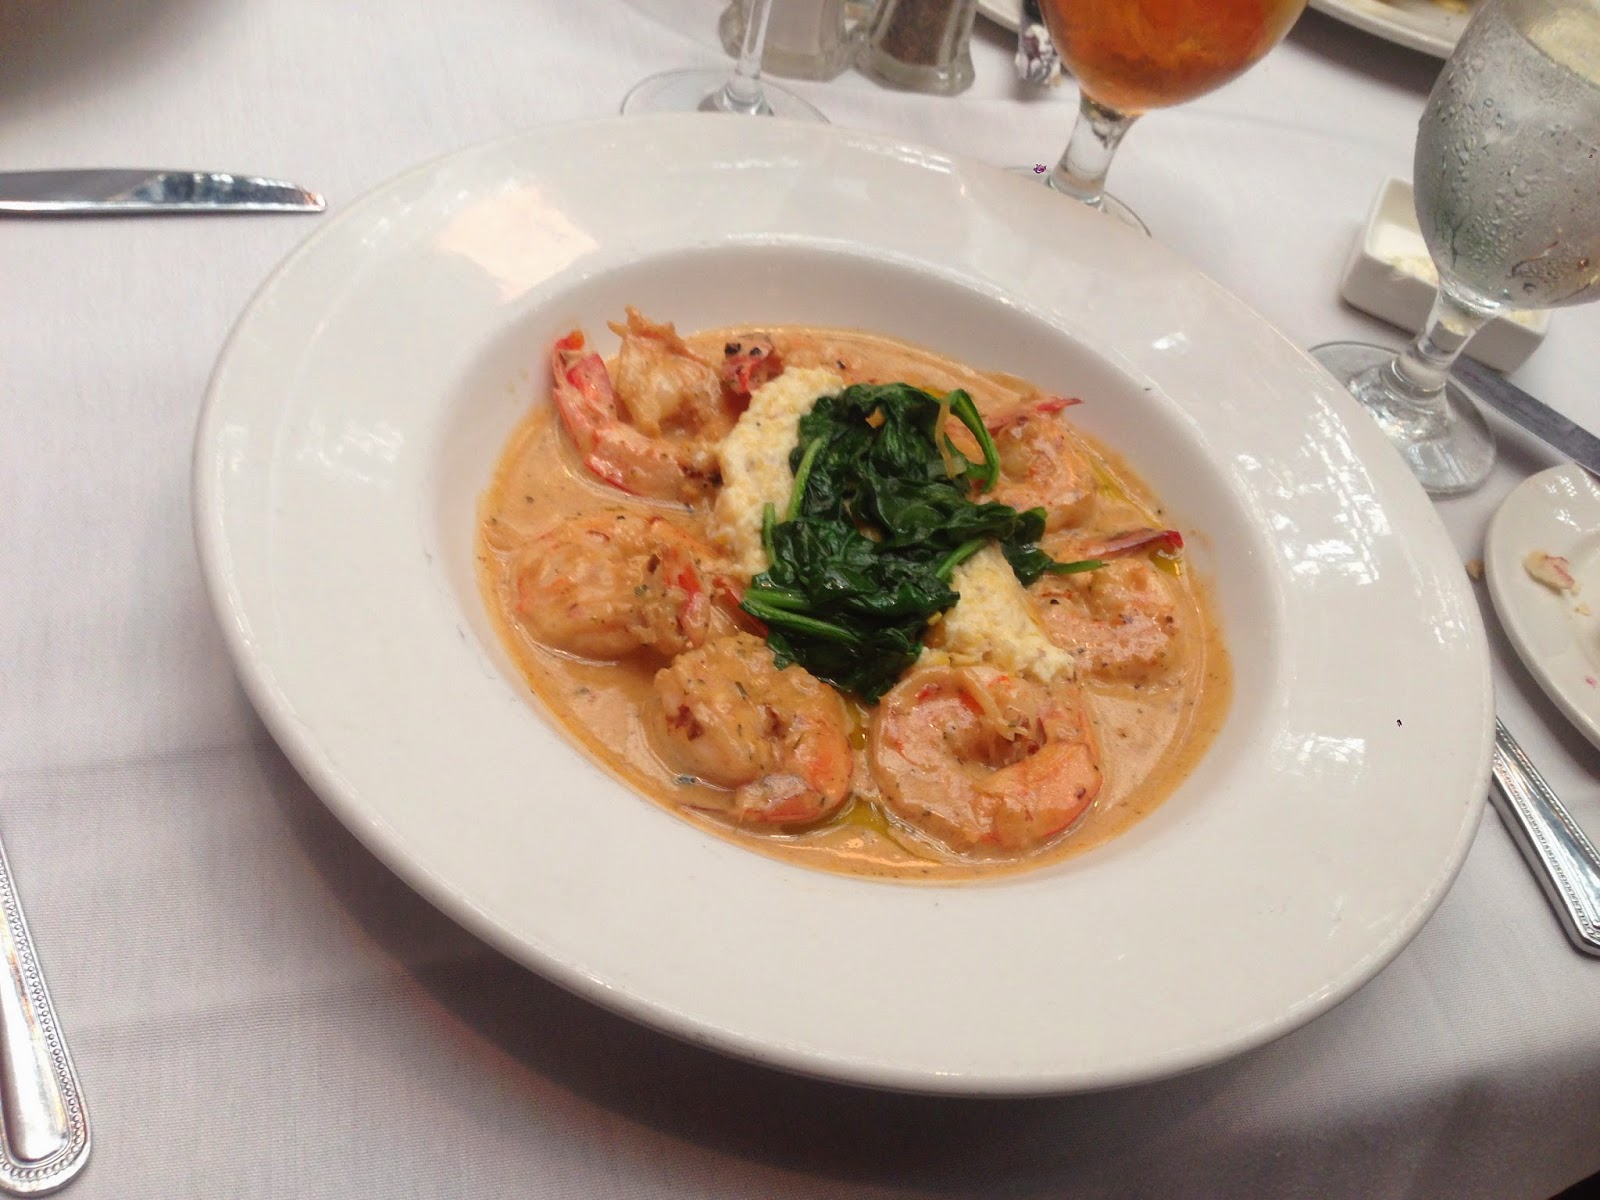 Juban's Shrimp & Grits: Gulf shrimp broiled in New Orleans barbeque butter, with garlic cheese grits,  and spinach primavera